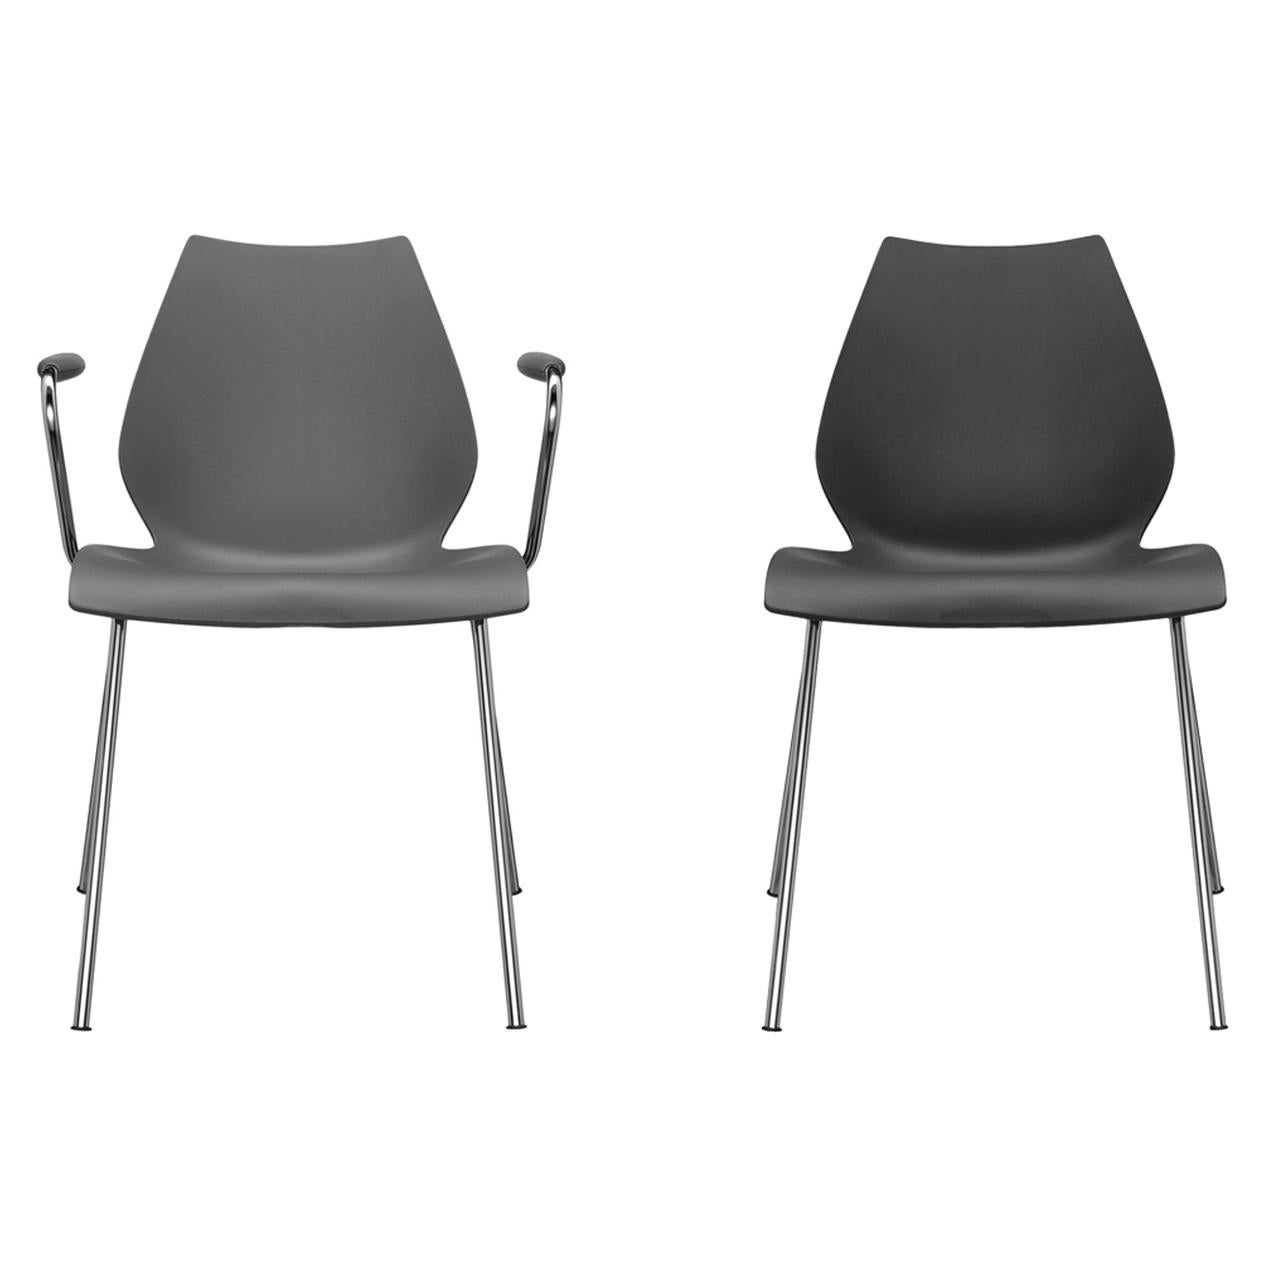 Set of 2 Kartell Maui Armchair in Black by Vico Magistretti